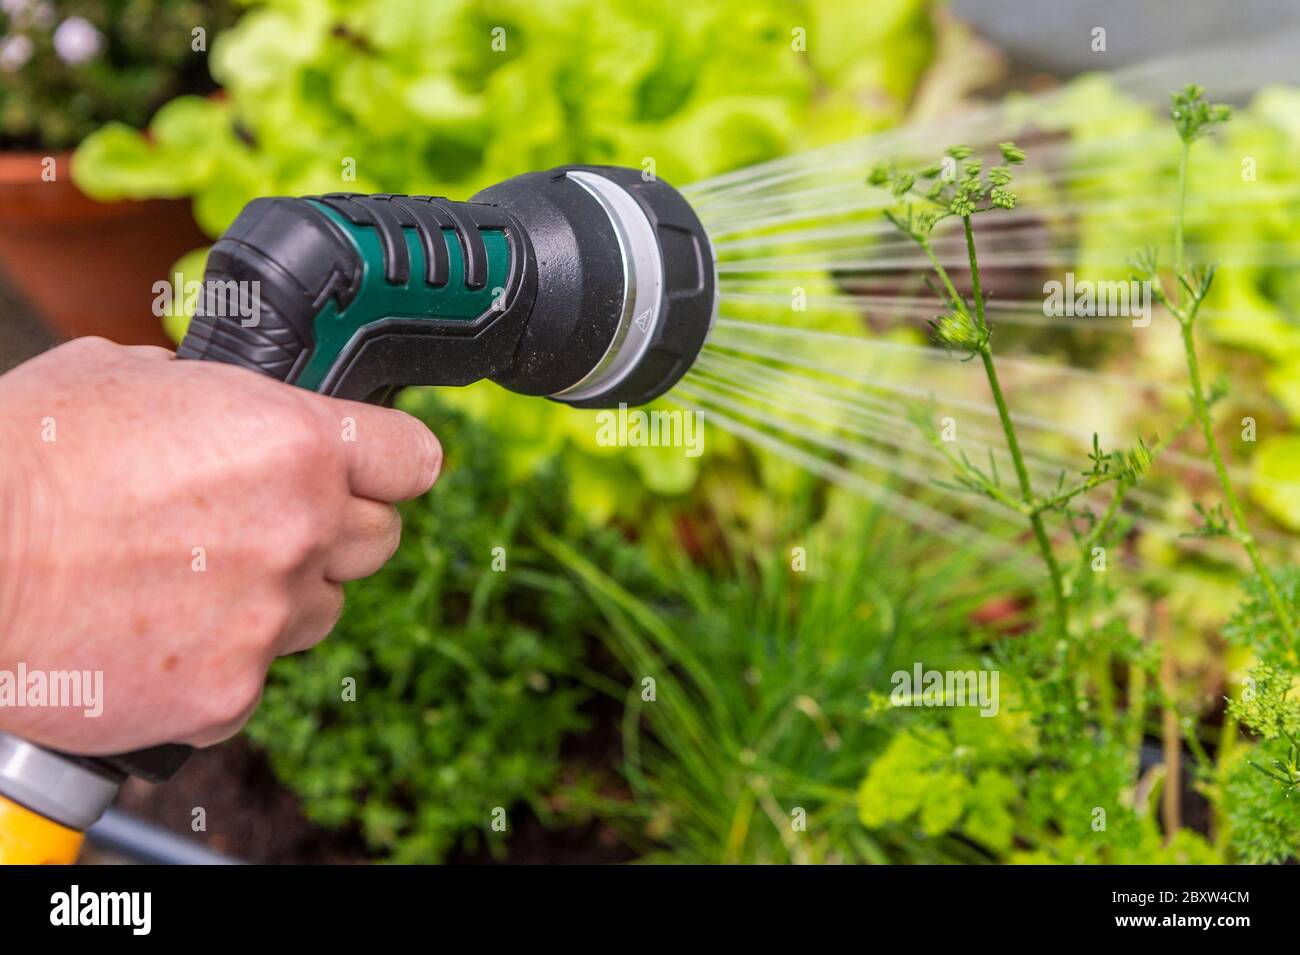 Ireland. 8th Jun, 2020. A woman waters her plants with a hosepipe in Ireland before a country-wide hosepipe ban comes into force at midnight tonight. The demand for water has increased by 20% due to the Covid-19 pandemic and the need to wash hands more often. Irish Water has said the hosepipe ban will last until Tues 21st July. Credit: AG News/Alamy Live News. Stock Photo